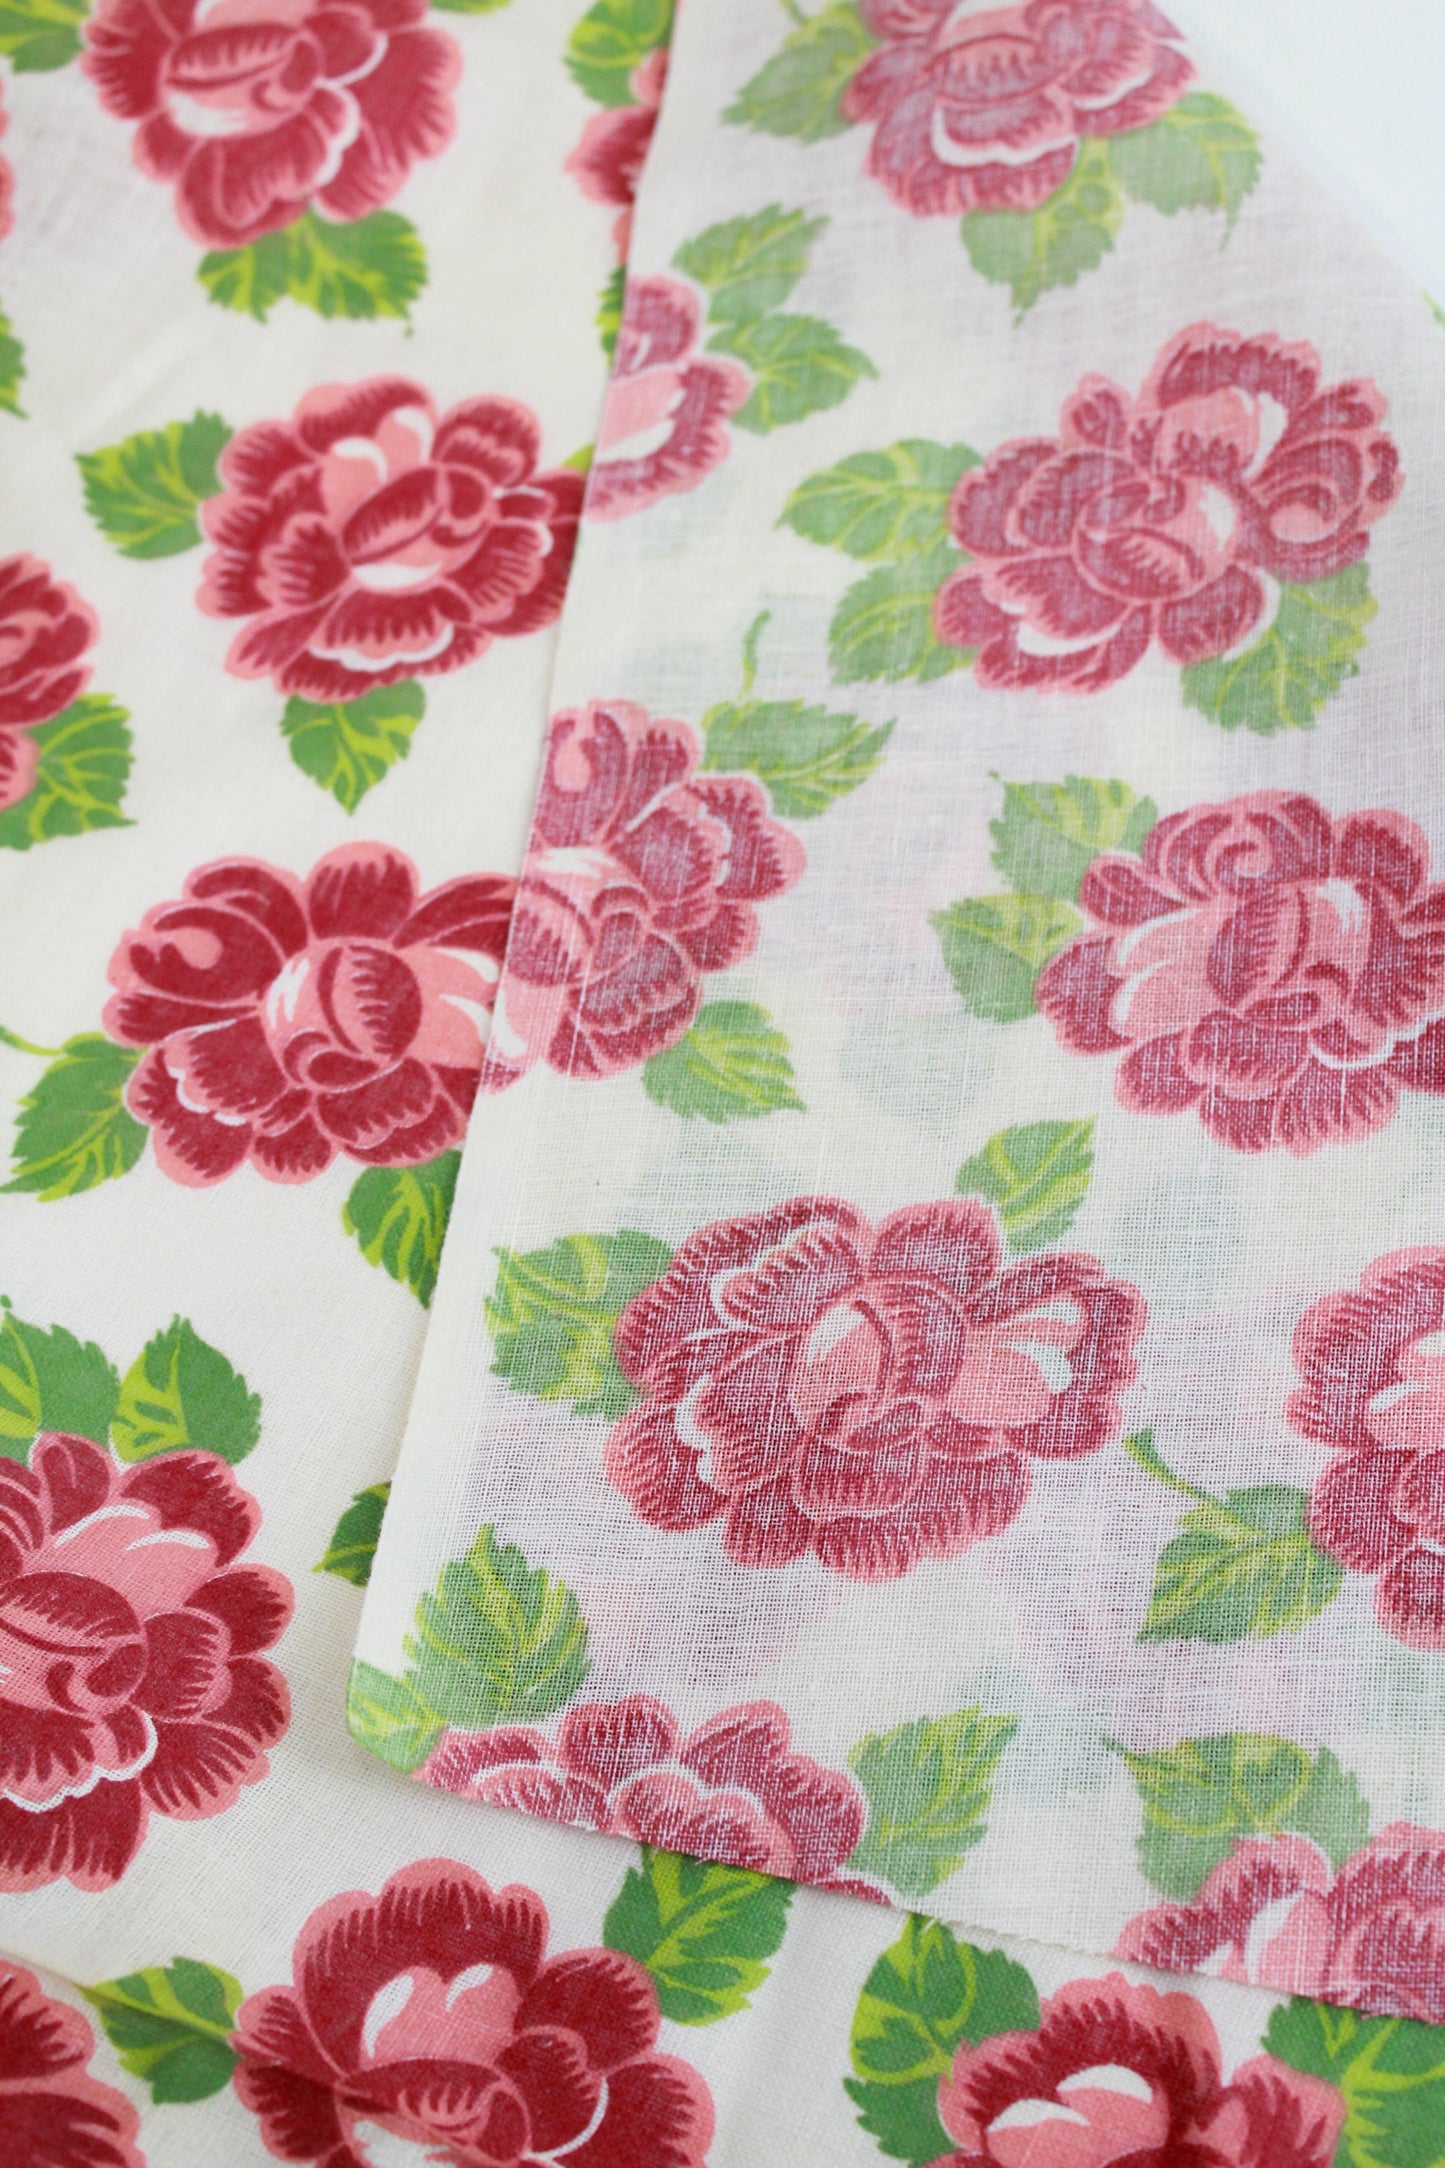 1940s/50s Rose Floral Printed Cotton Fabric, 5 Yards, Vintage Rose Printed Sewing Fabric